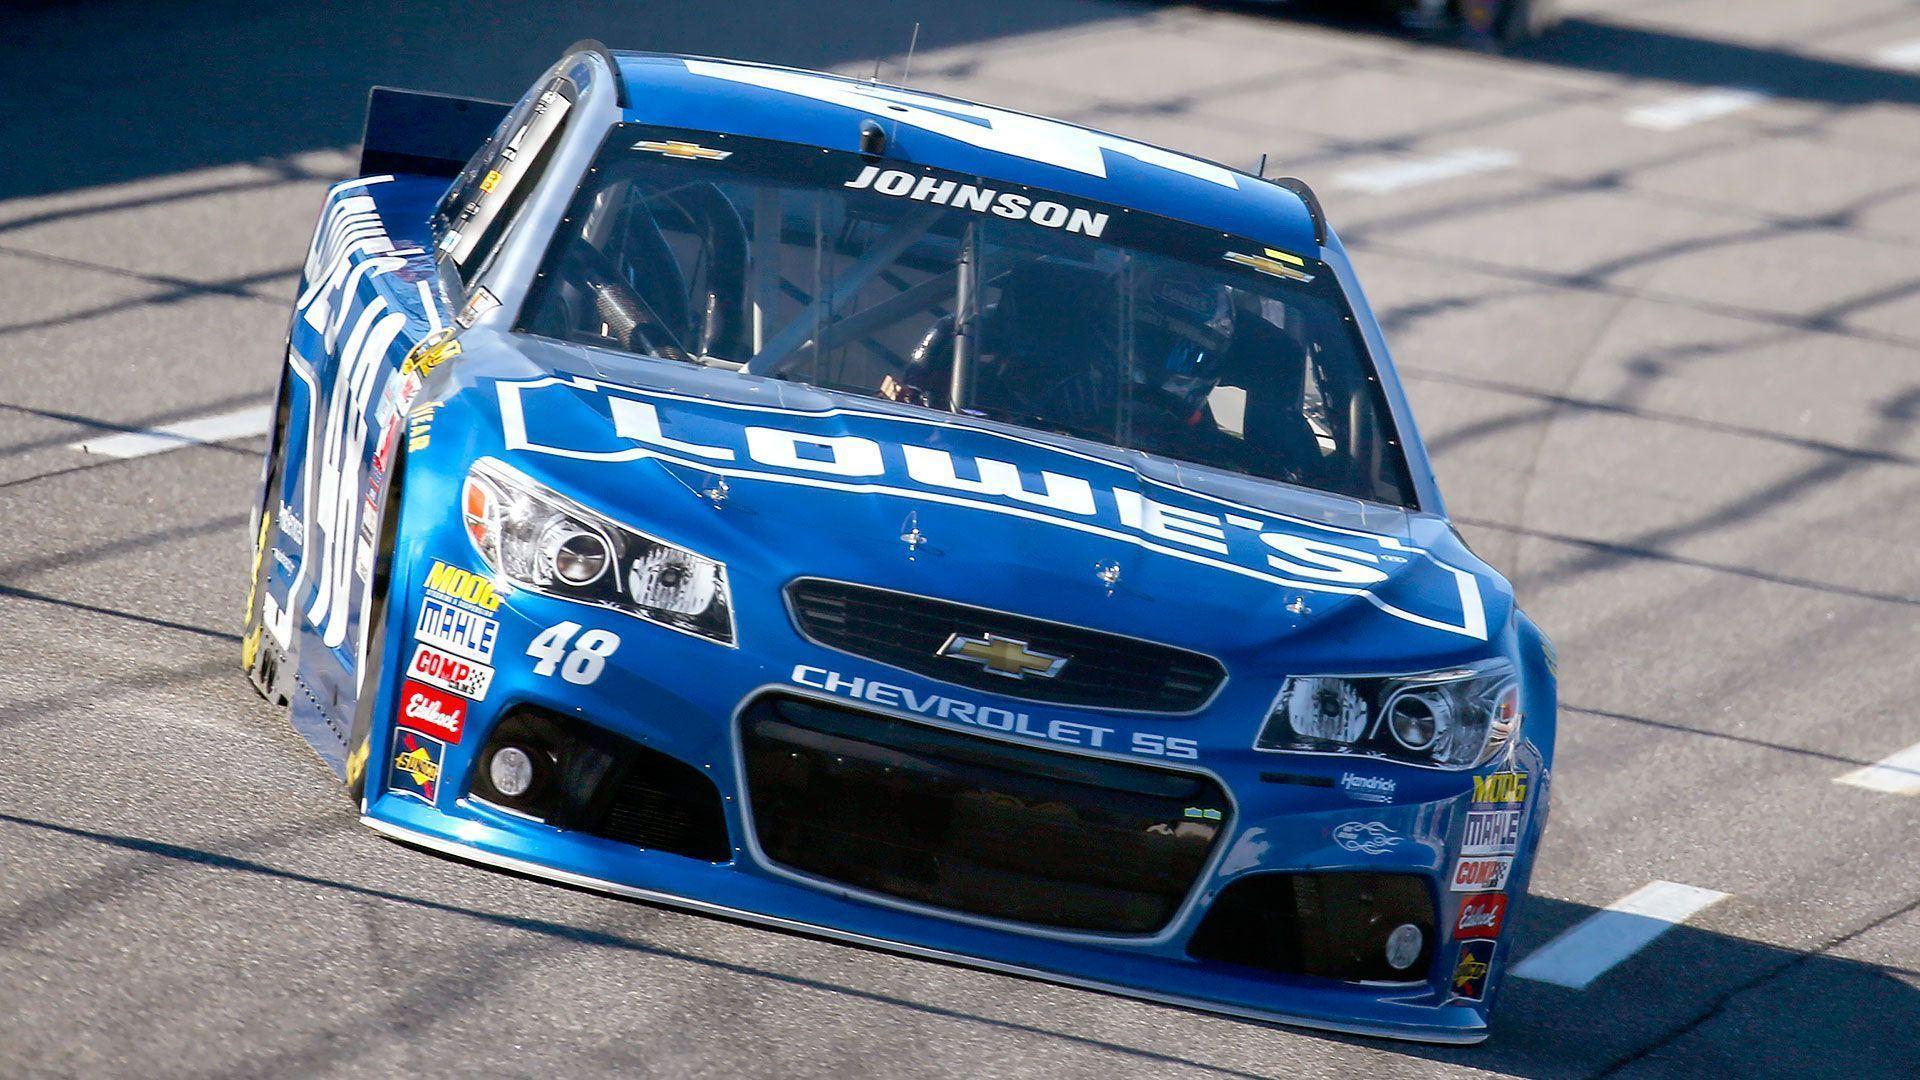 Duck Commander 500 results: Jimmie Johnson wins again